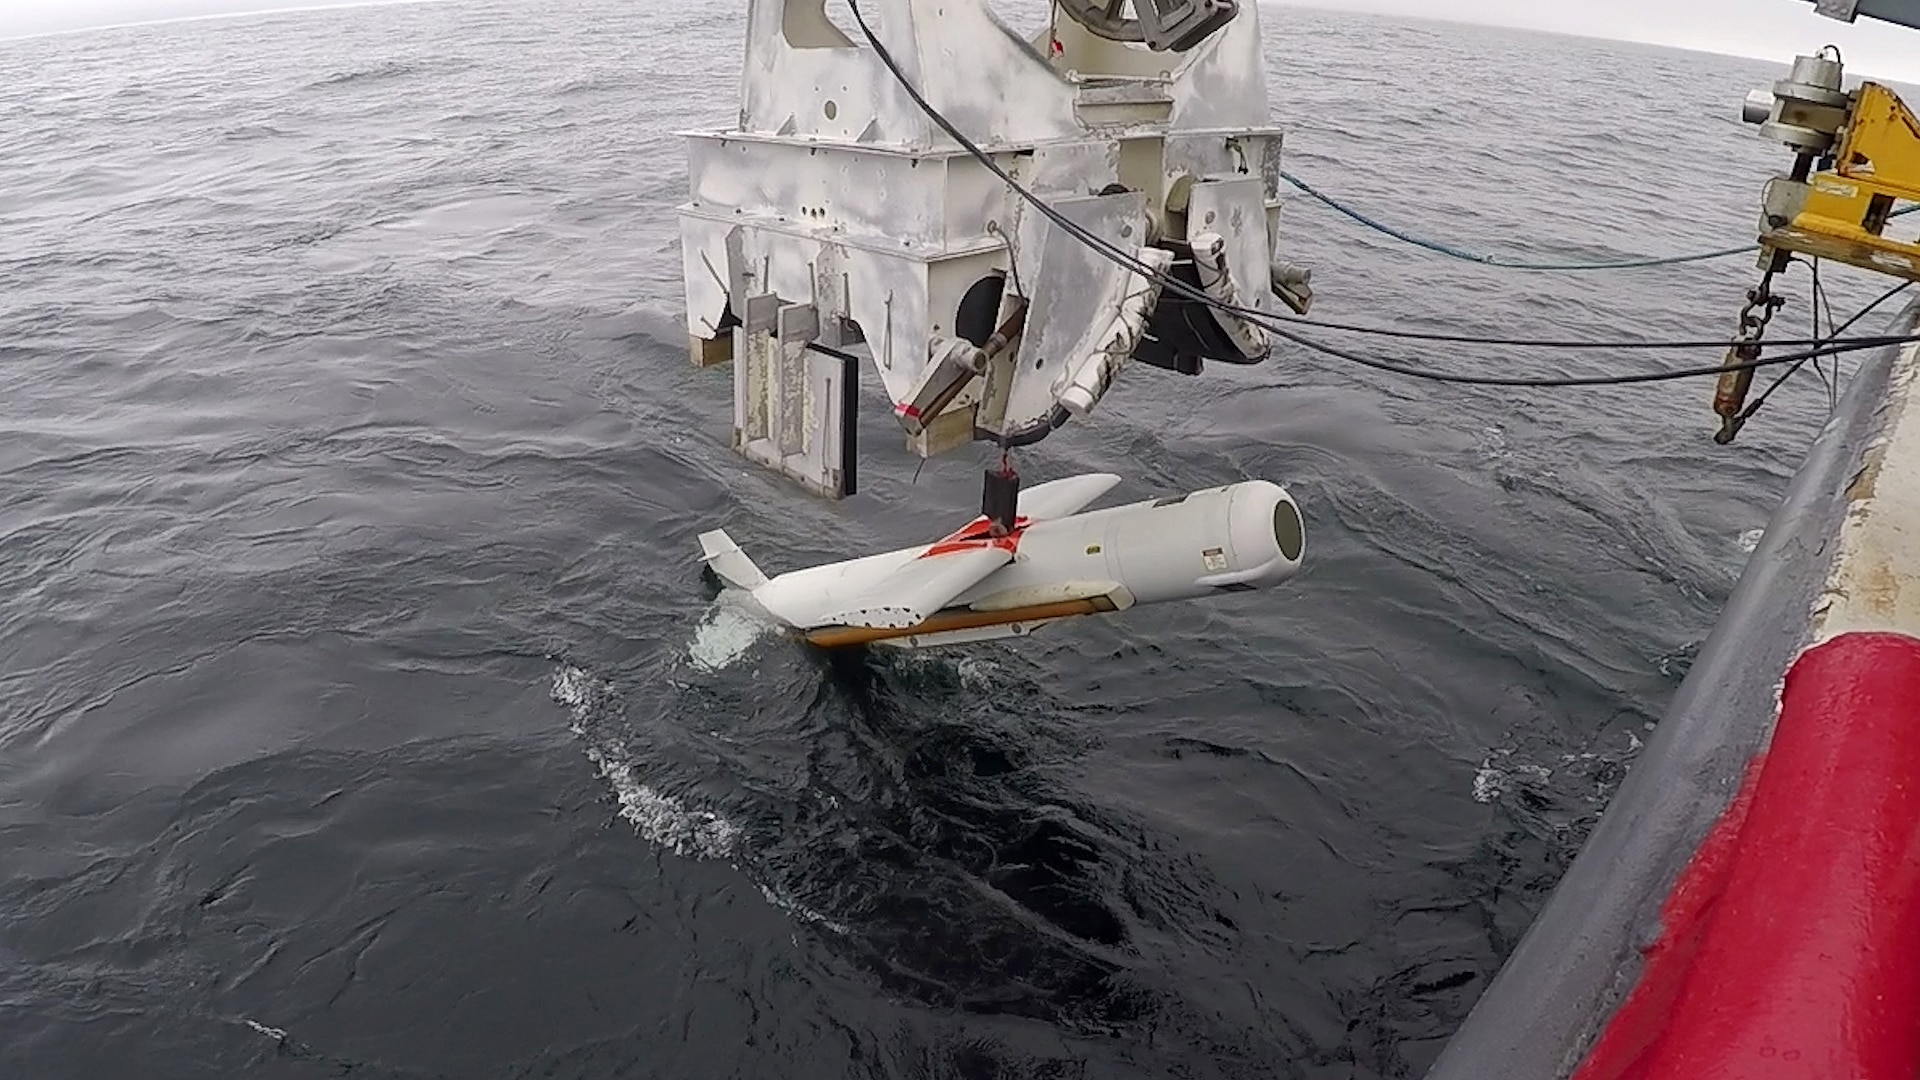 The AN/AQS-20C Towed Mine-hunting Sonar is streamed into Gulf of Mexico waters of the Naval Surface Warfare Center Panama City Division Gulf test range. Developmental Testing was completed on Feb. 12, 2019.